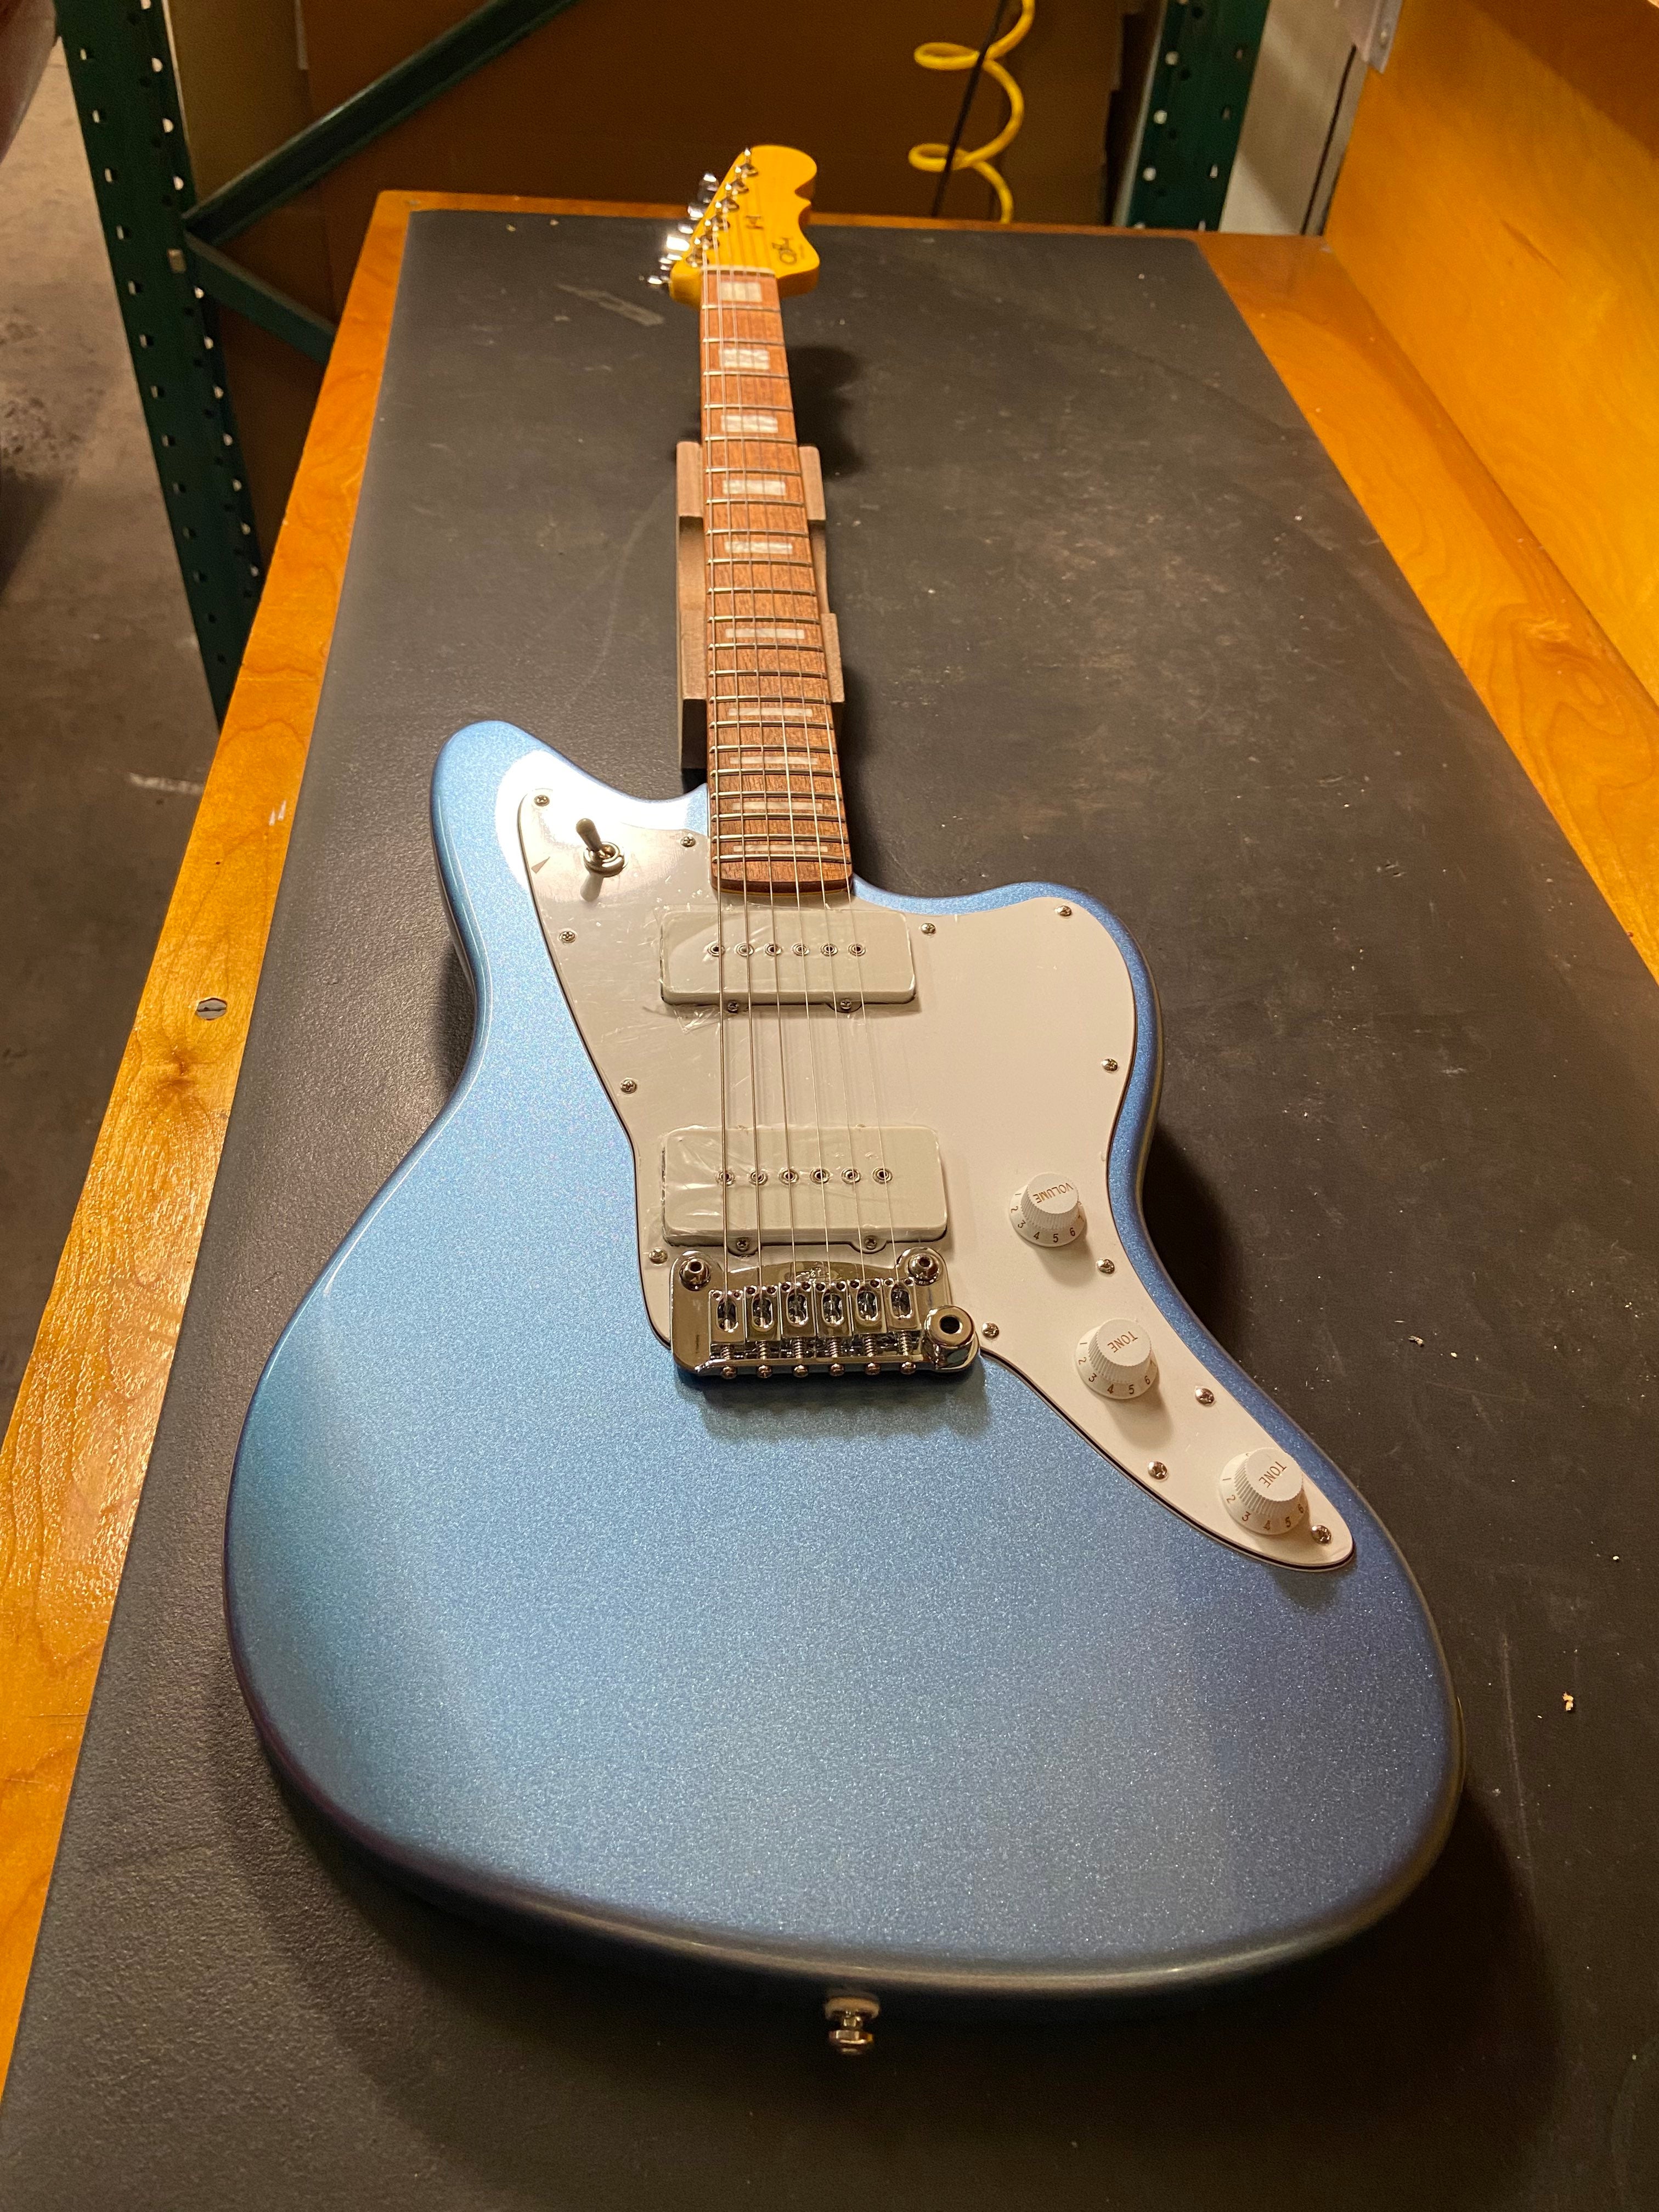 G&L Tribute Doheny Electric Guitar (B-Stock) $400